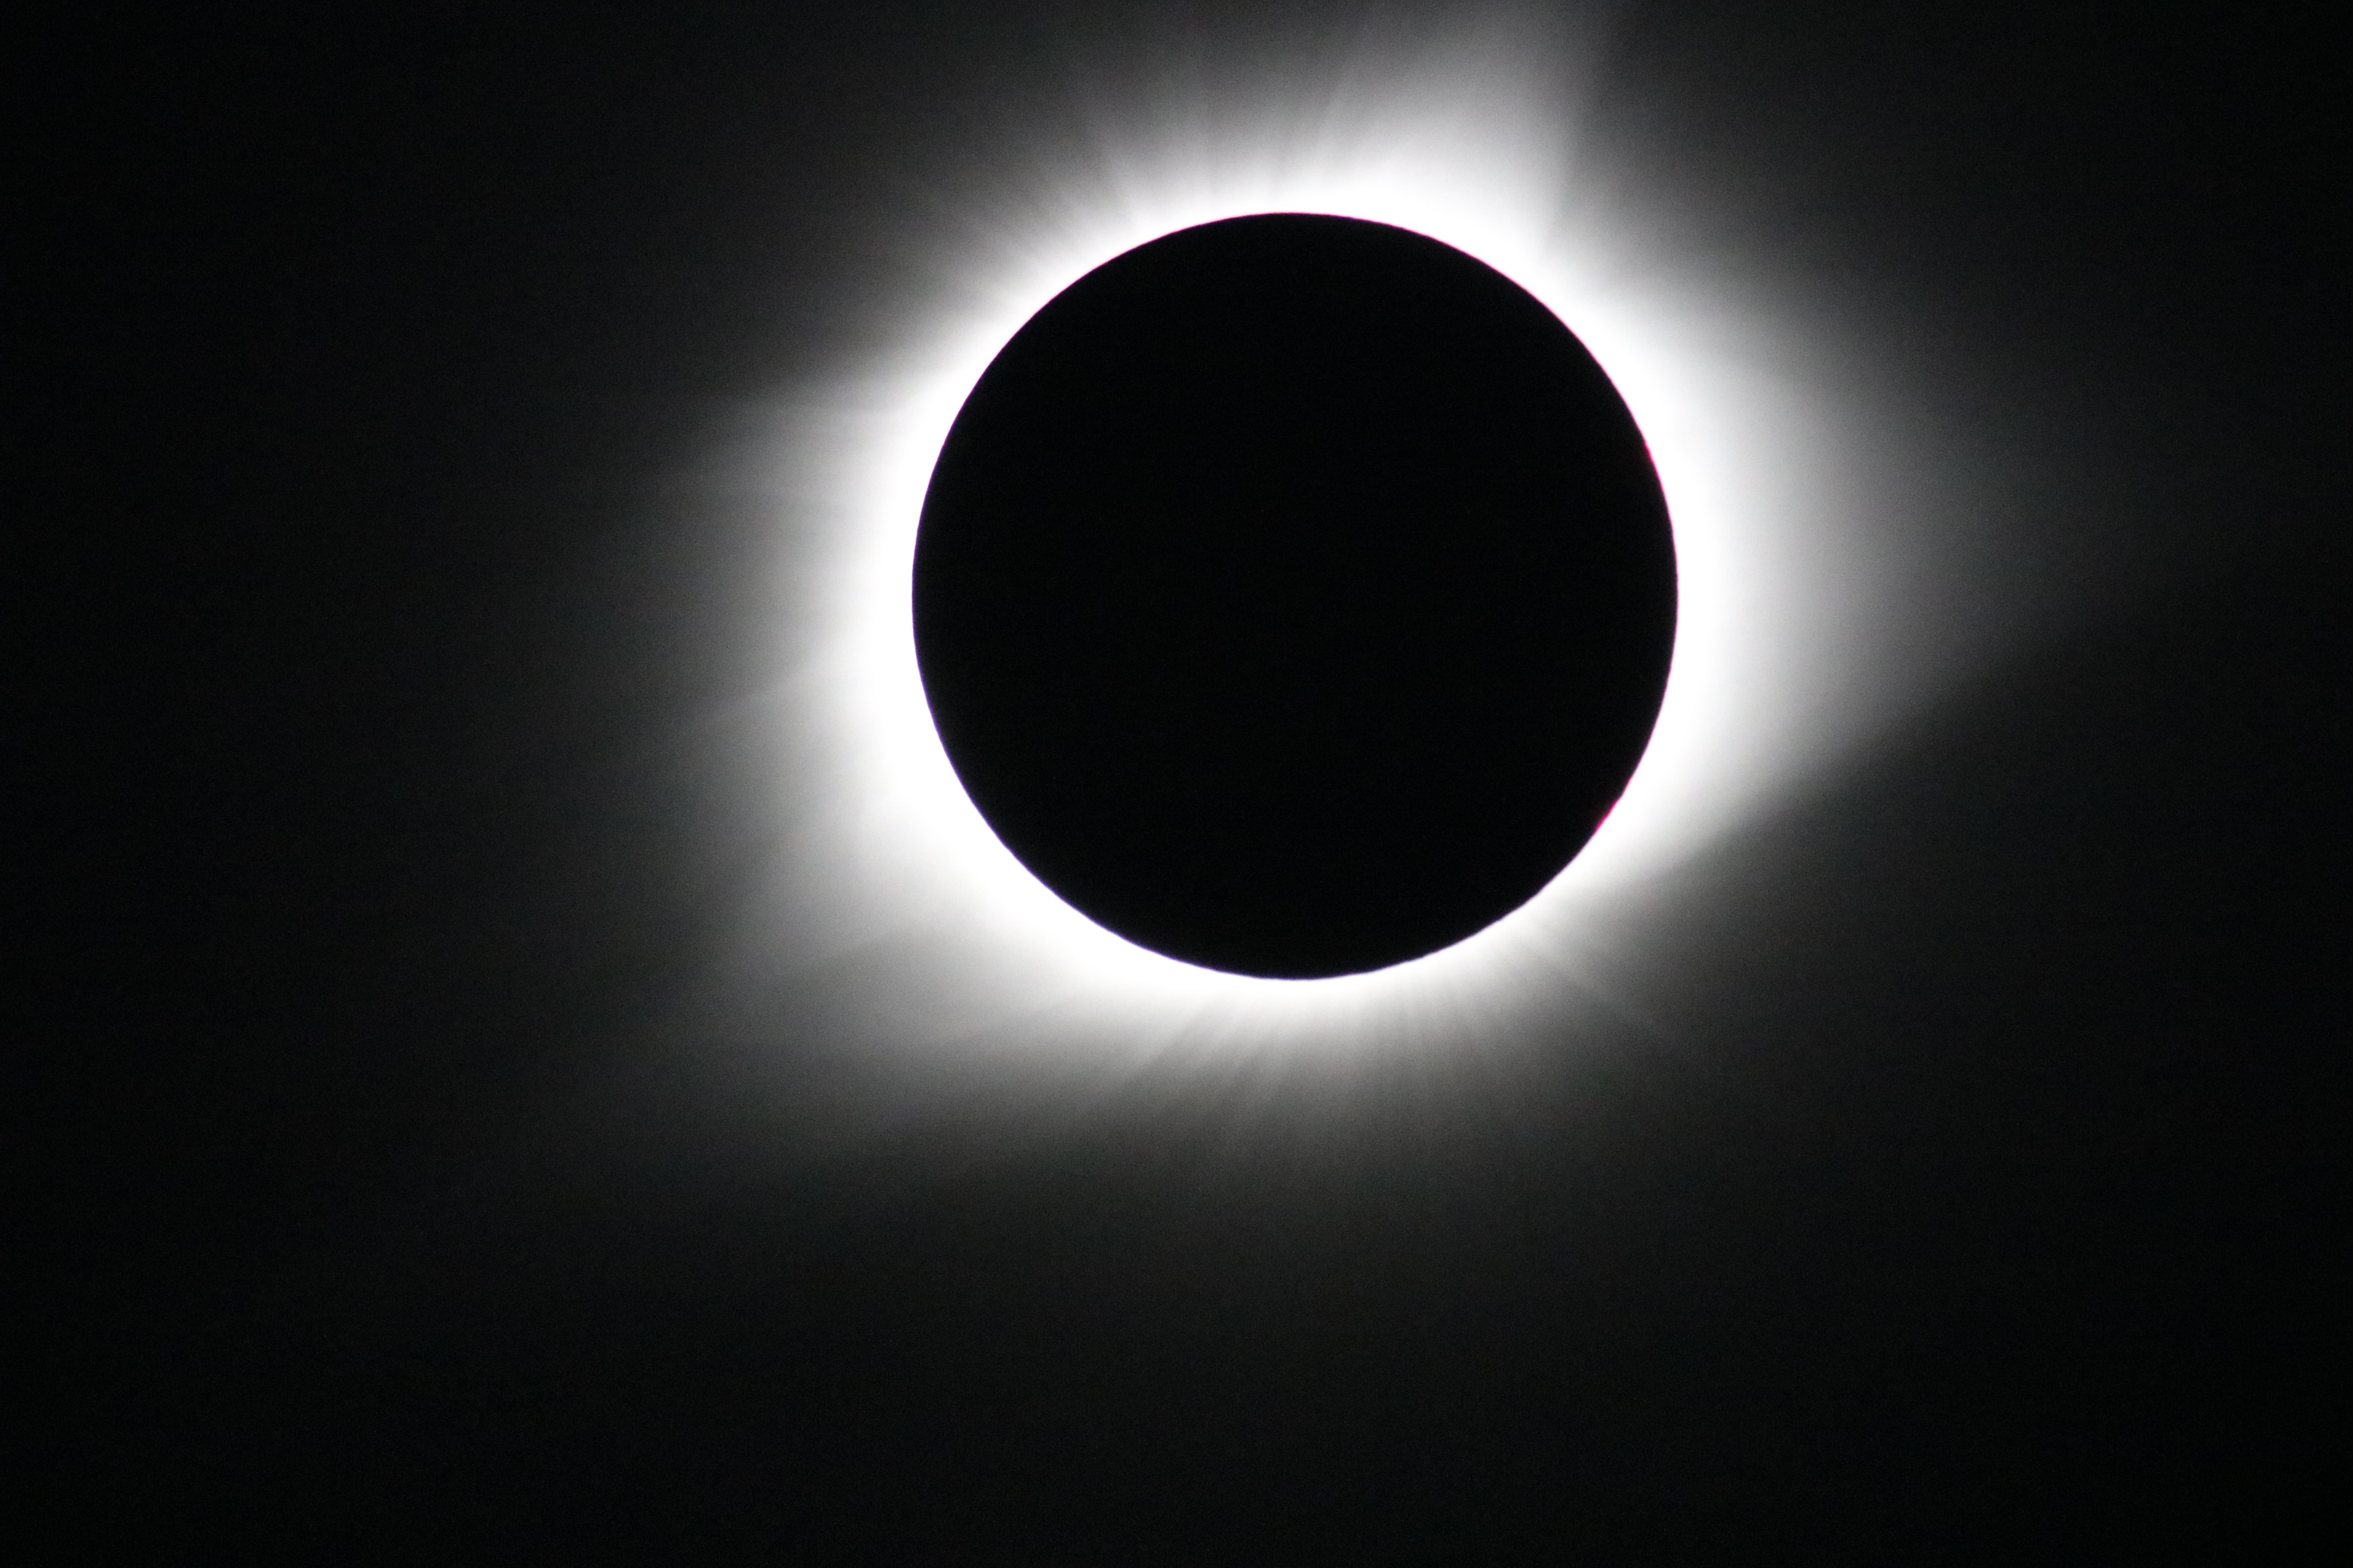 The wispy solar corona shines brightly behind the dark disk of the Moon during a total solar eclipse